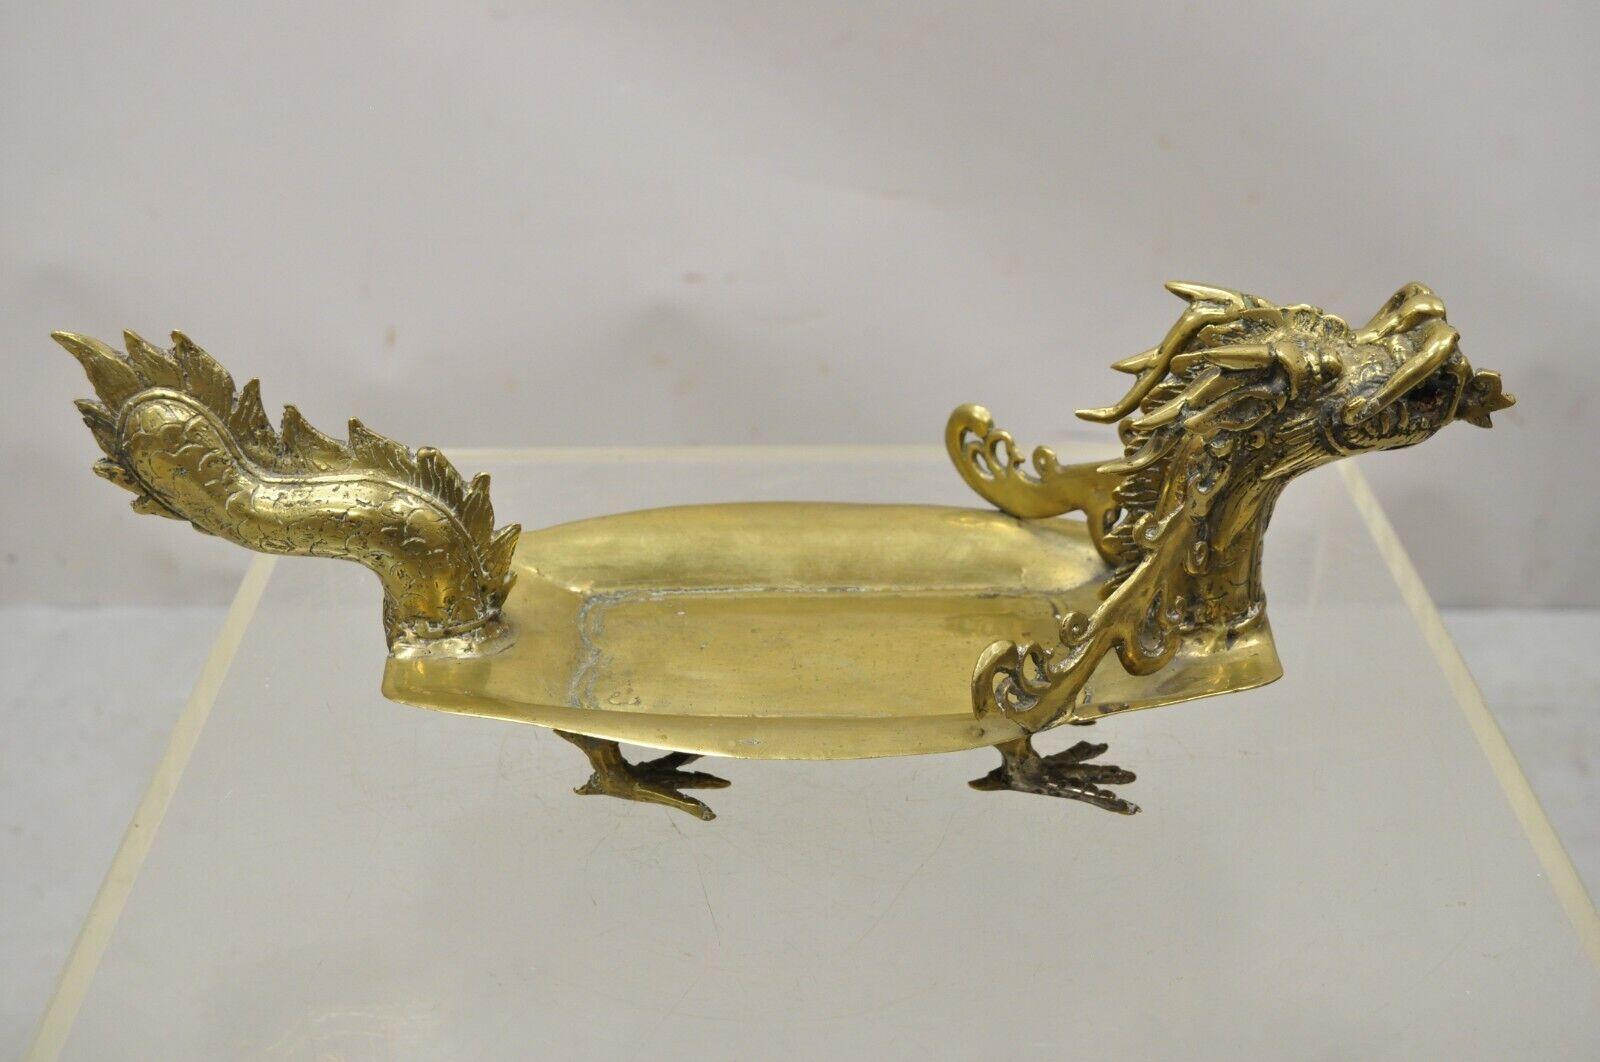 Vintage solid brass dragon form Chinese trinket dish desk accessory. Item featured is raised on feet, ornate detail, very nice vintage, great style and form. Circa Mid 20th Century. Measurements: 5.5